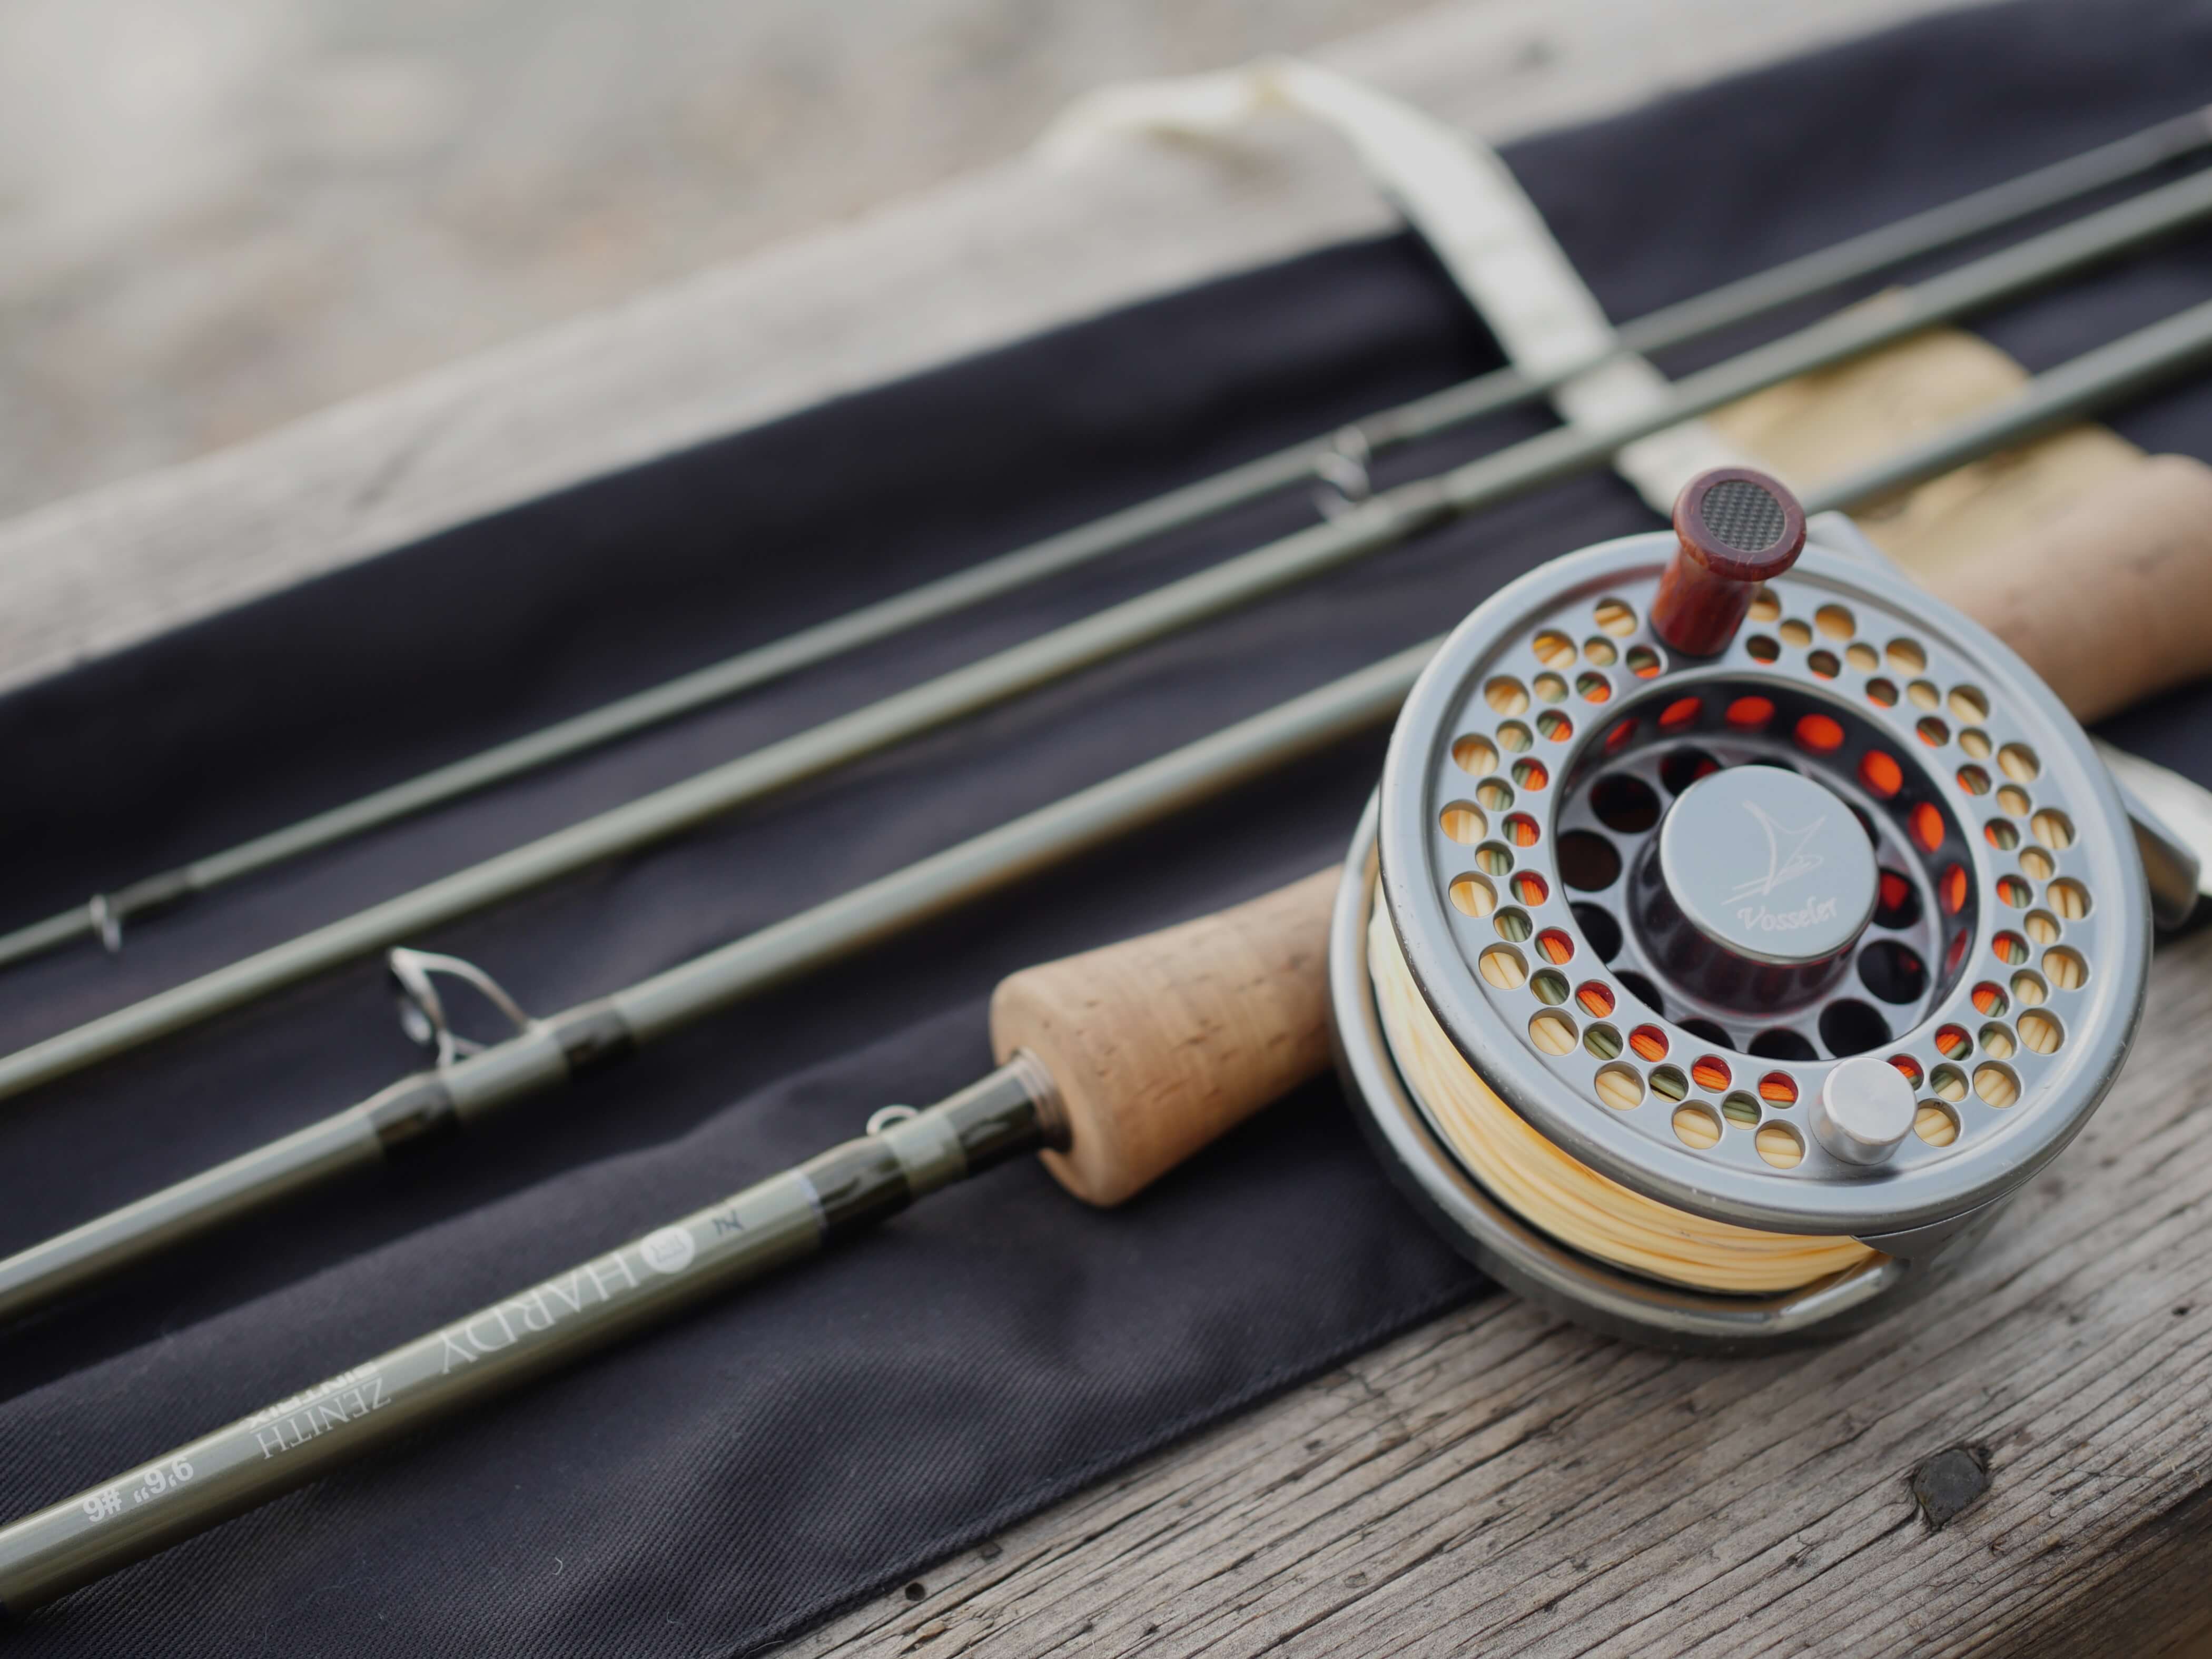 Rio InTouch Single Handed Spey